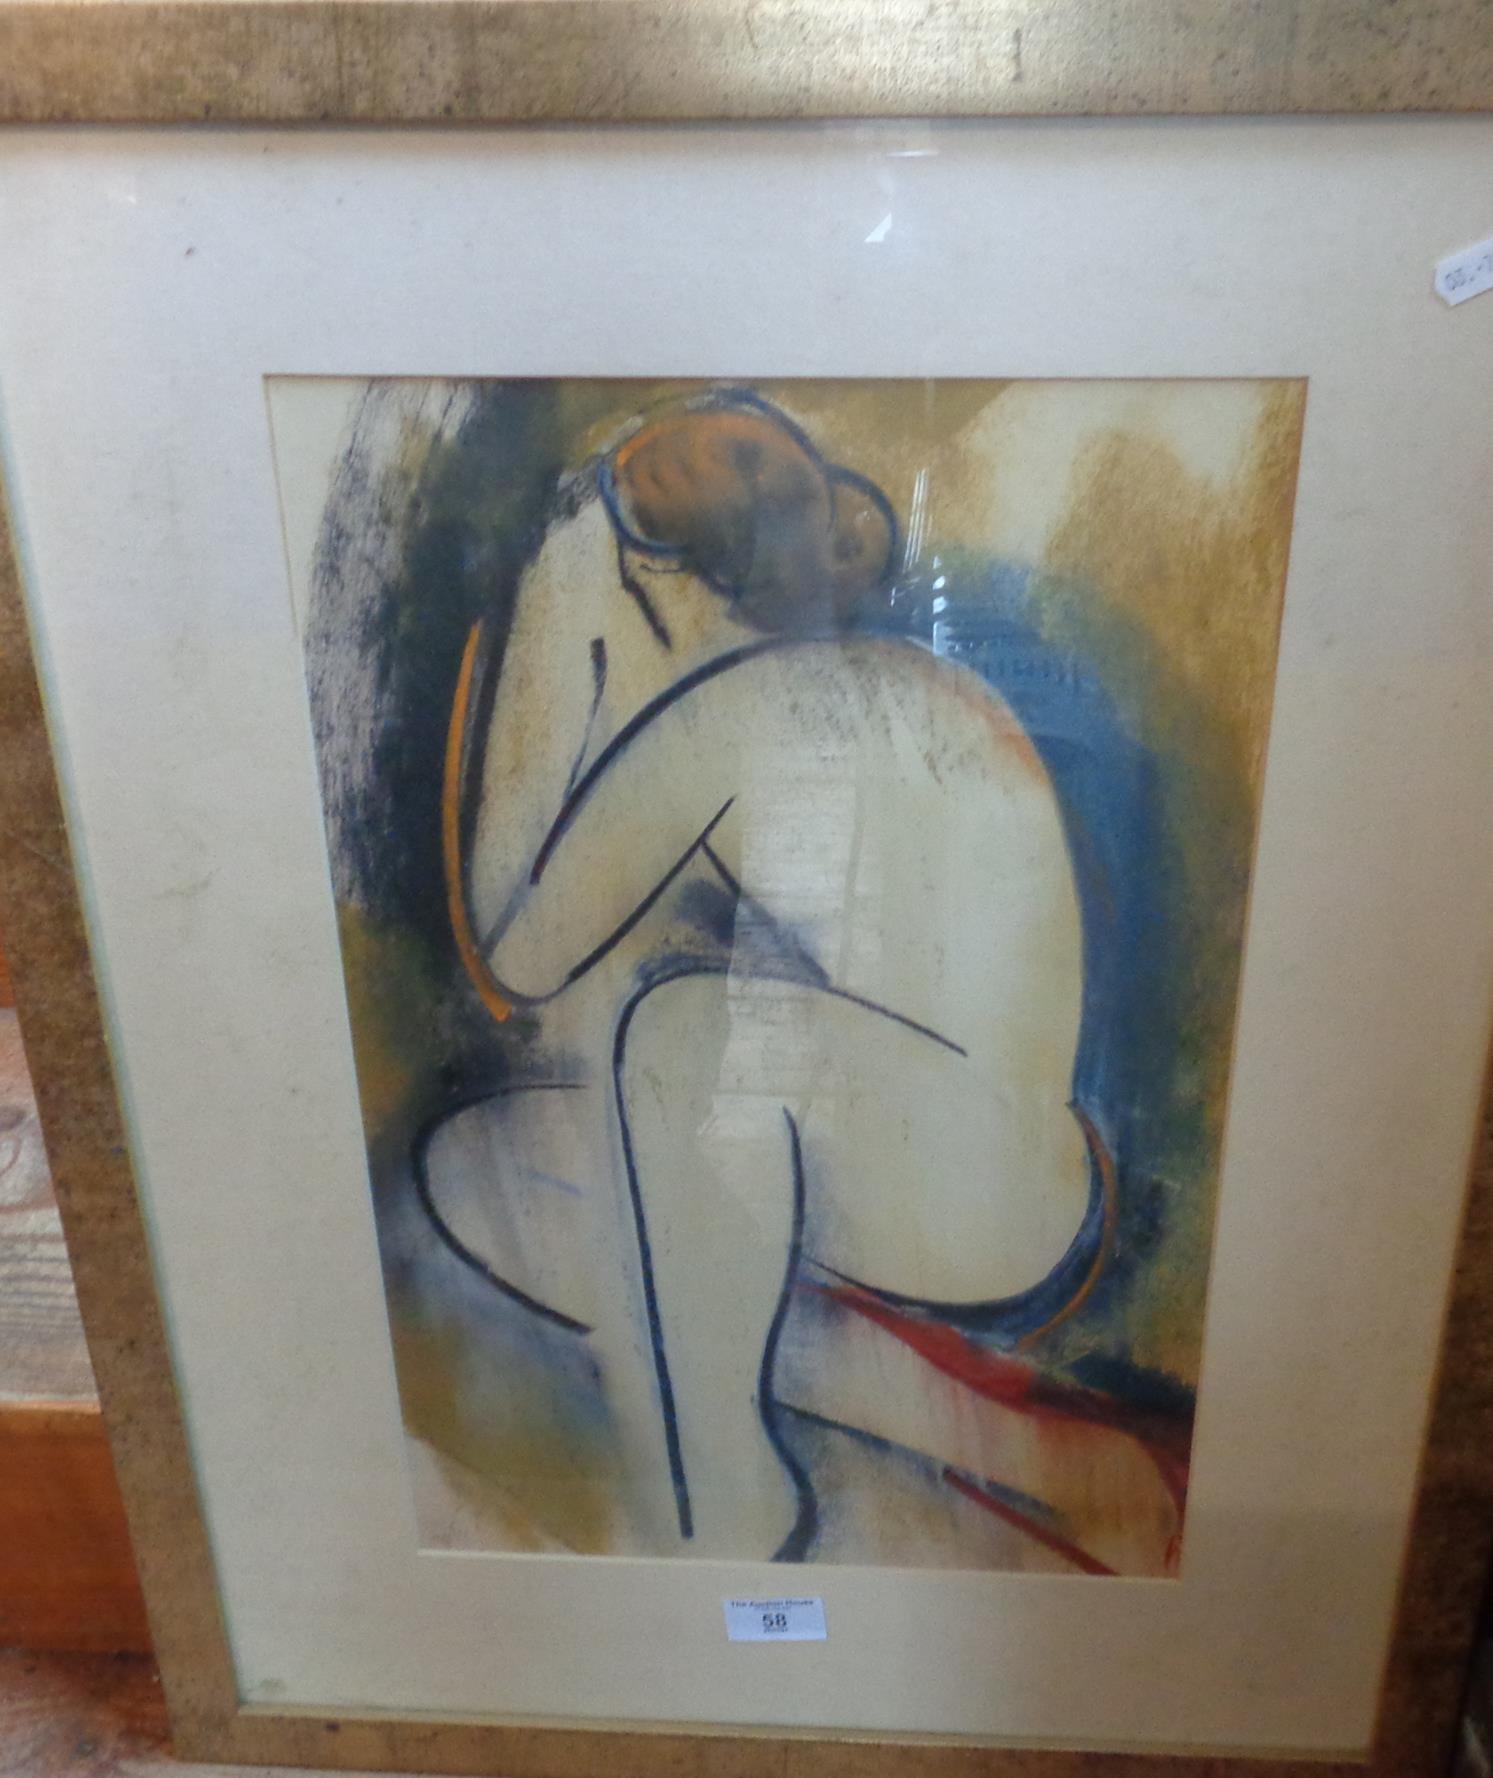 Colour print after Elizabeth STORK of an abstract nude study